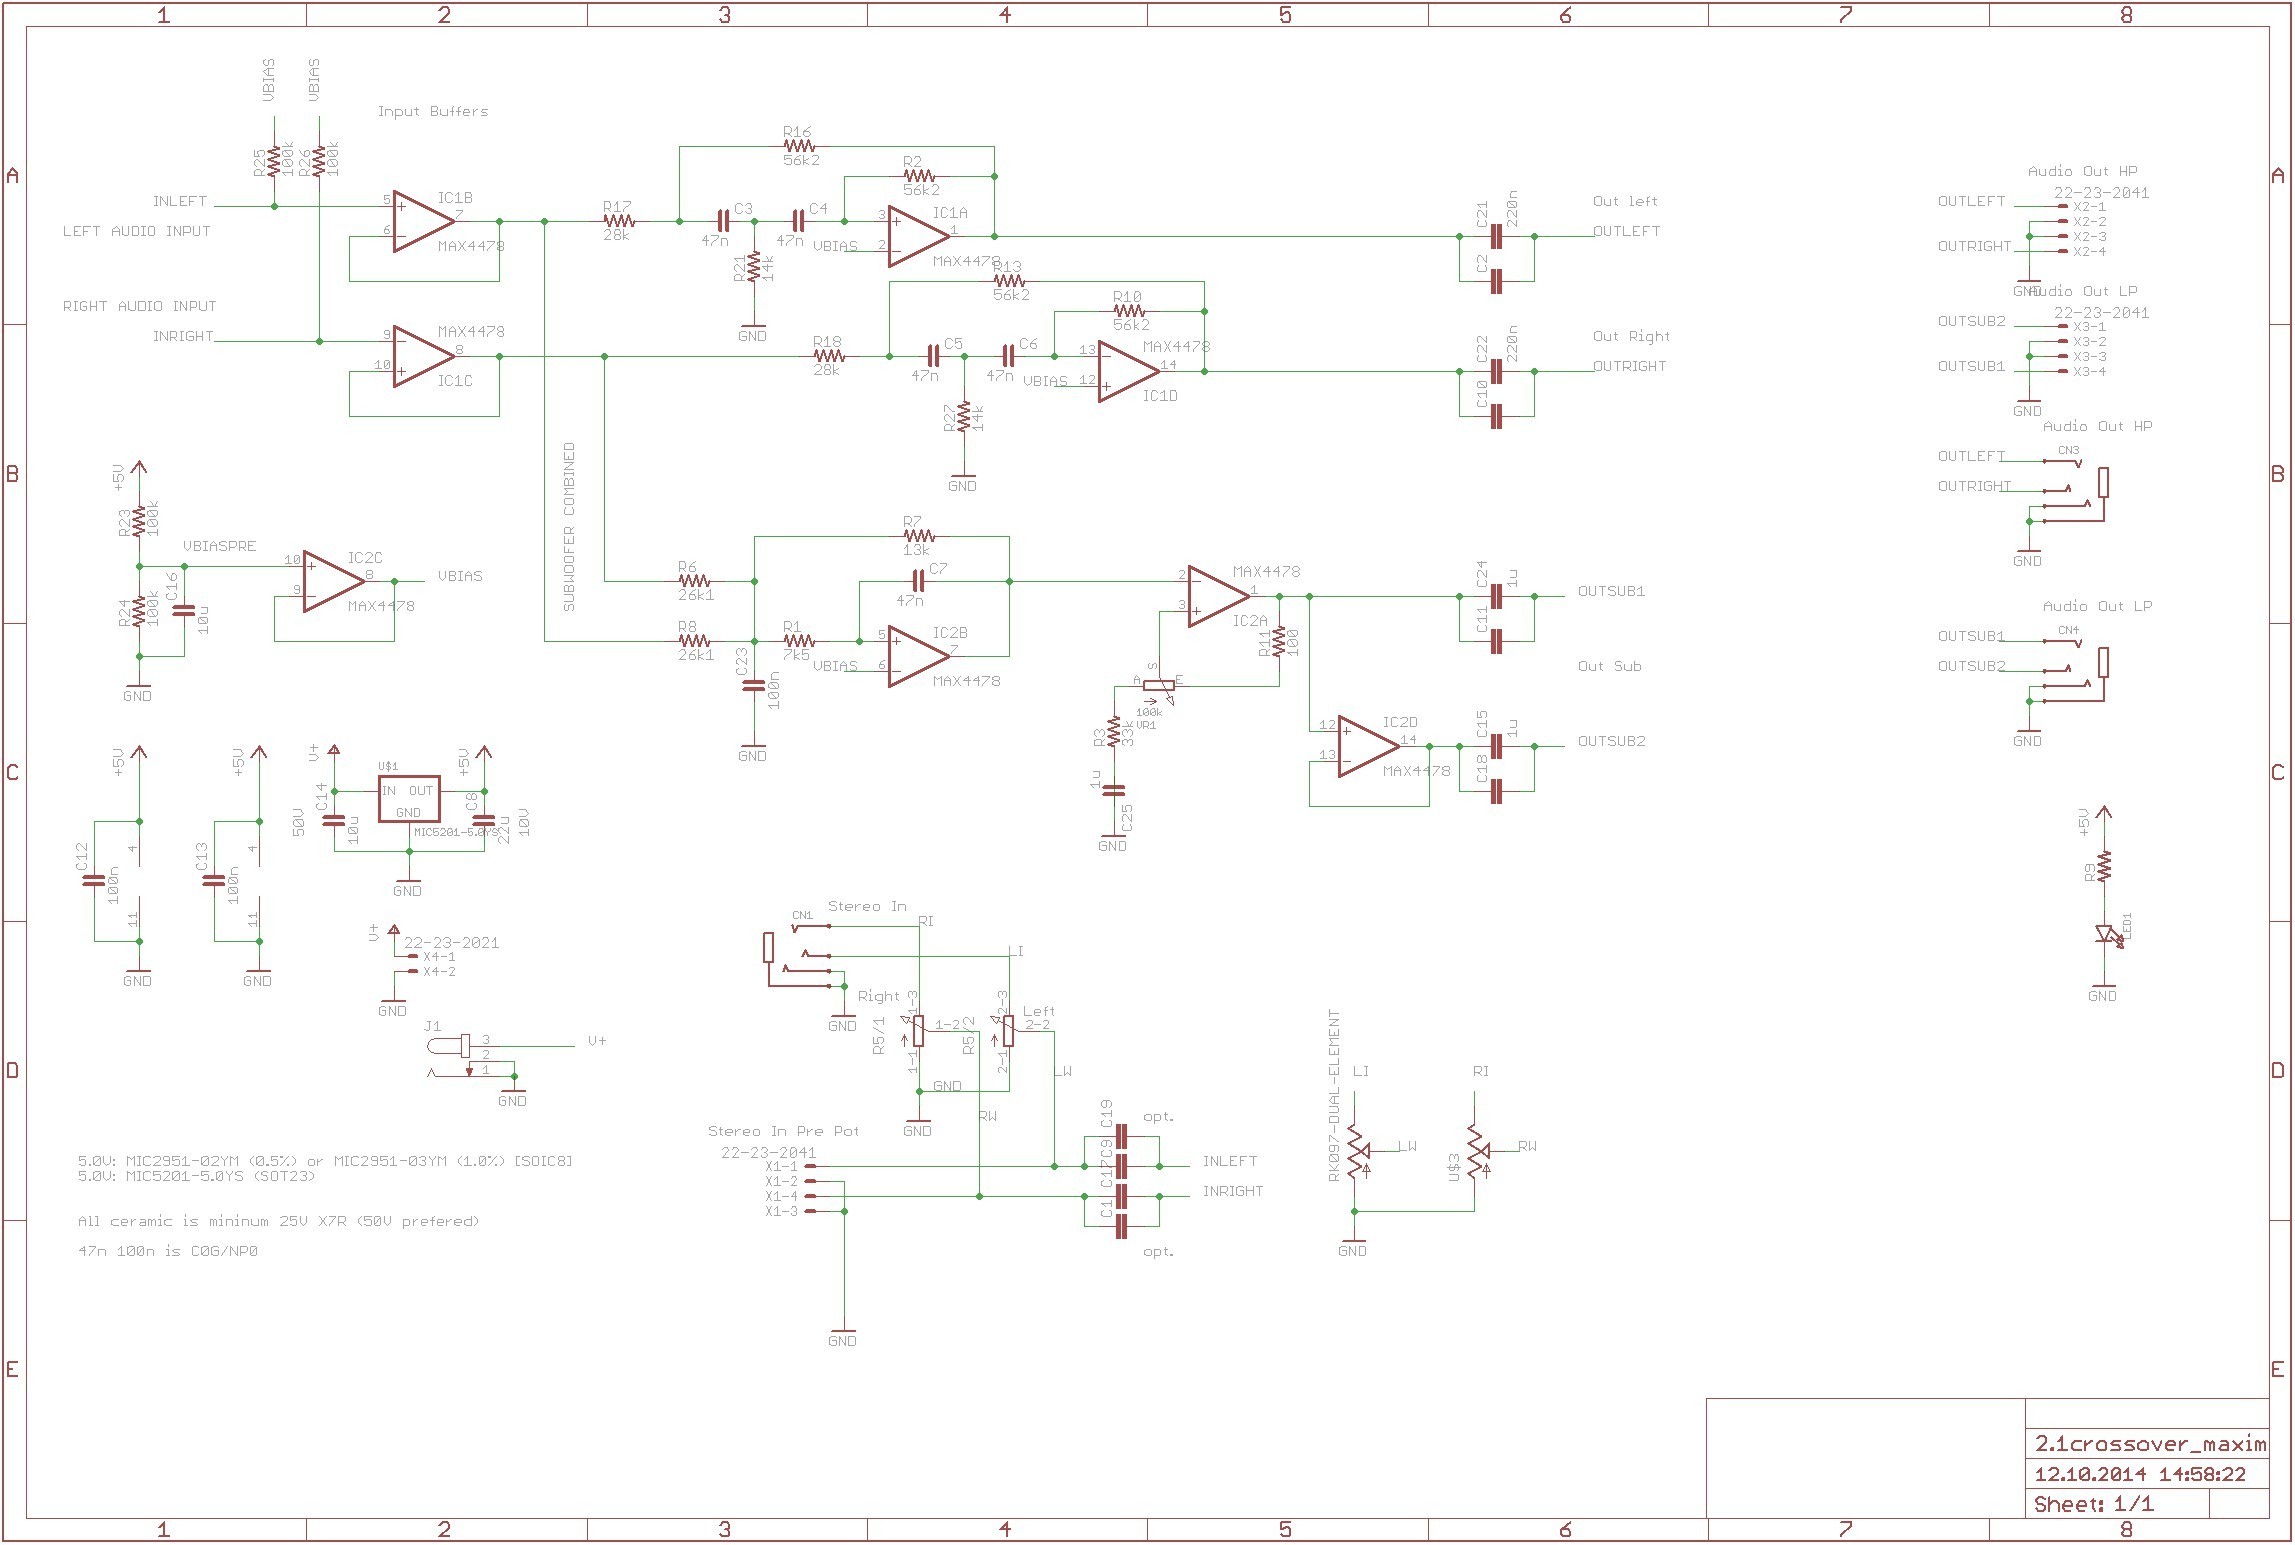 Led Light Wiring Diagram Aktive Crossoverfrequenzweiche Mit Max4478 360customs Crossover Schematic Rev 0d Wiring Lighting